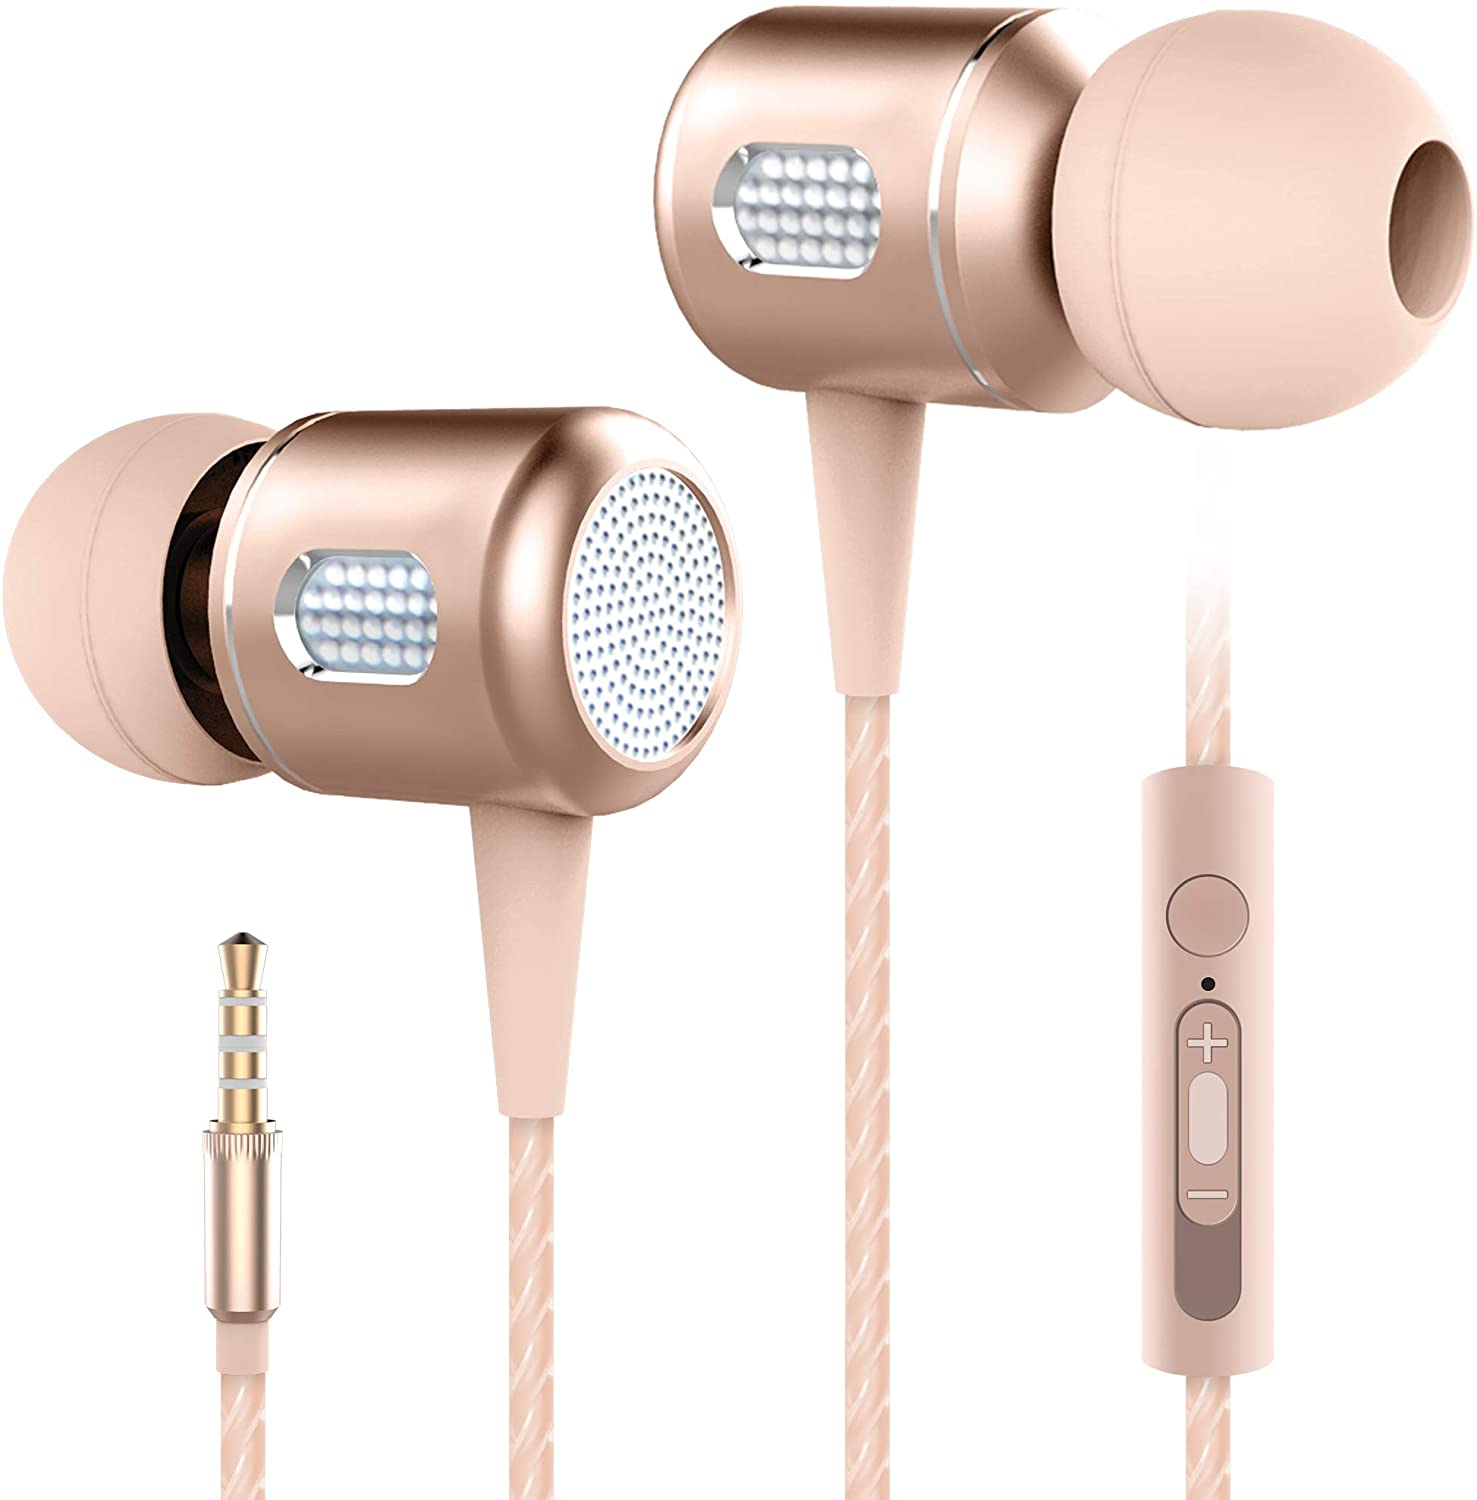 ''HyperGear 3.5mm Stereo Sound Earphones w/Microphone Noise Isolating Earbuds Compatible for IPHONEs,